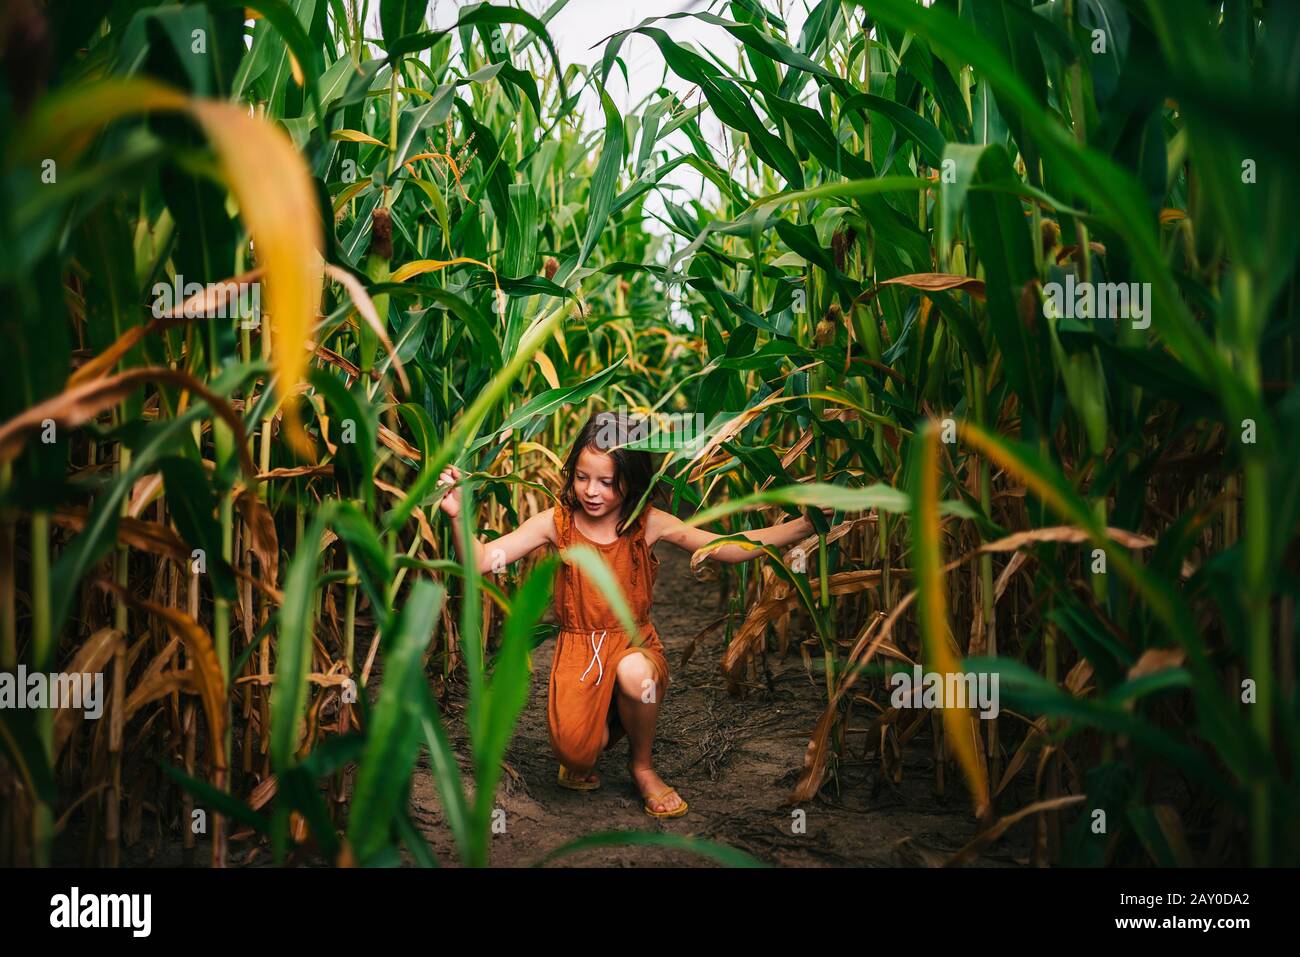 Girl playing in a corn field, USA Stock Photo